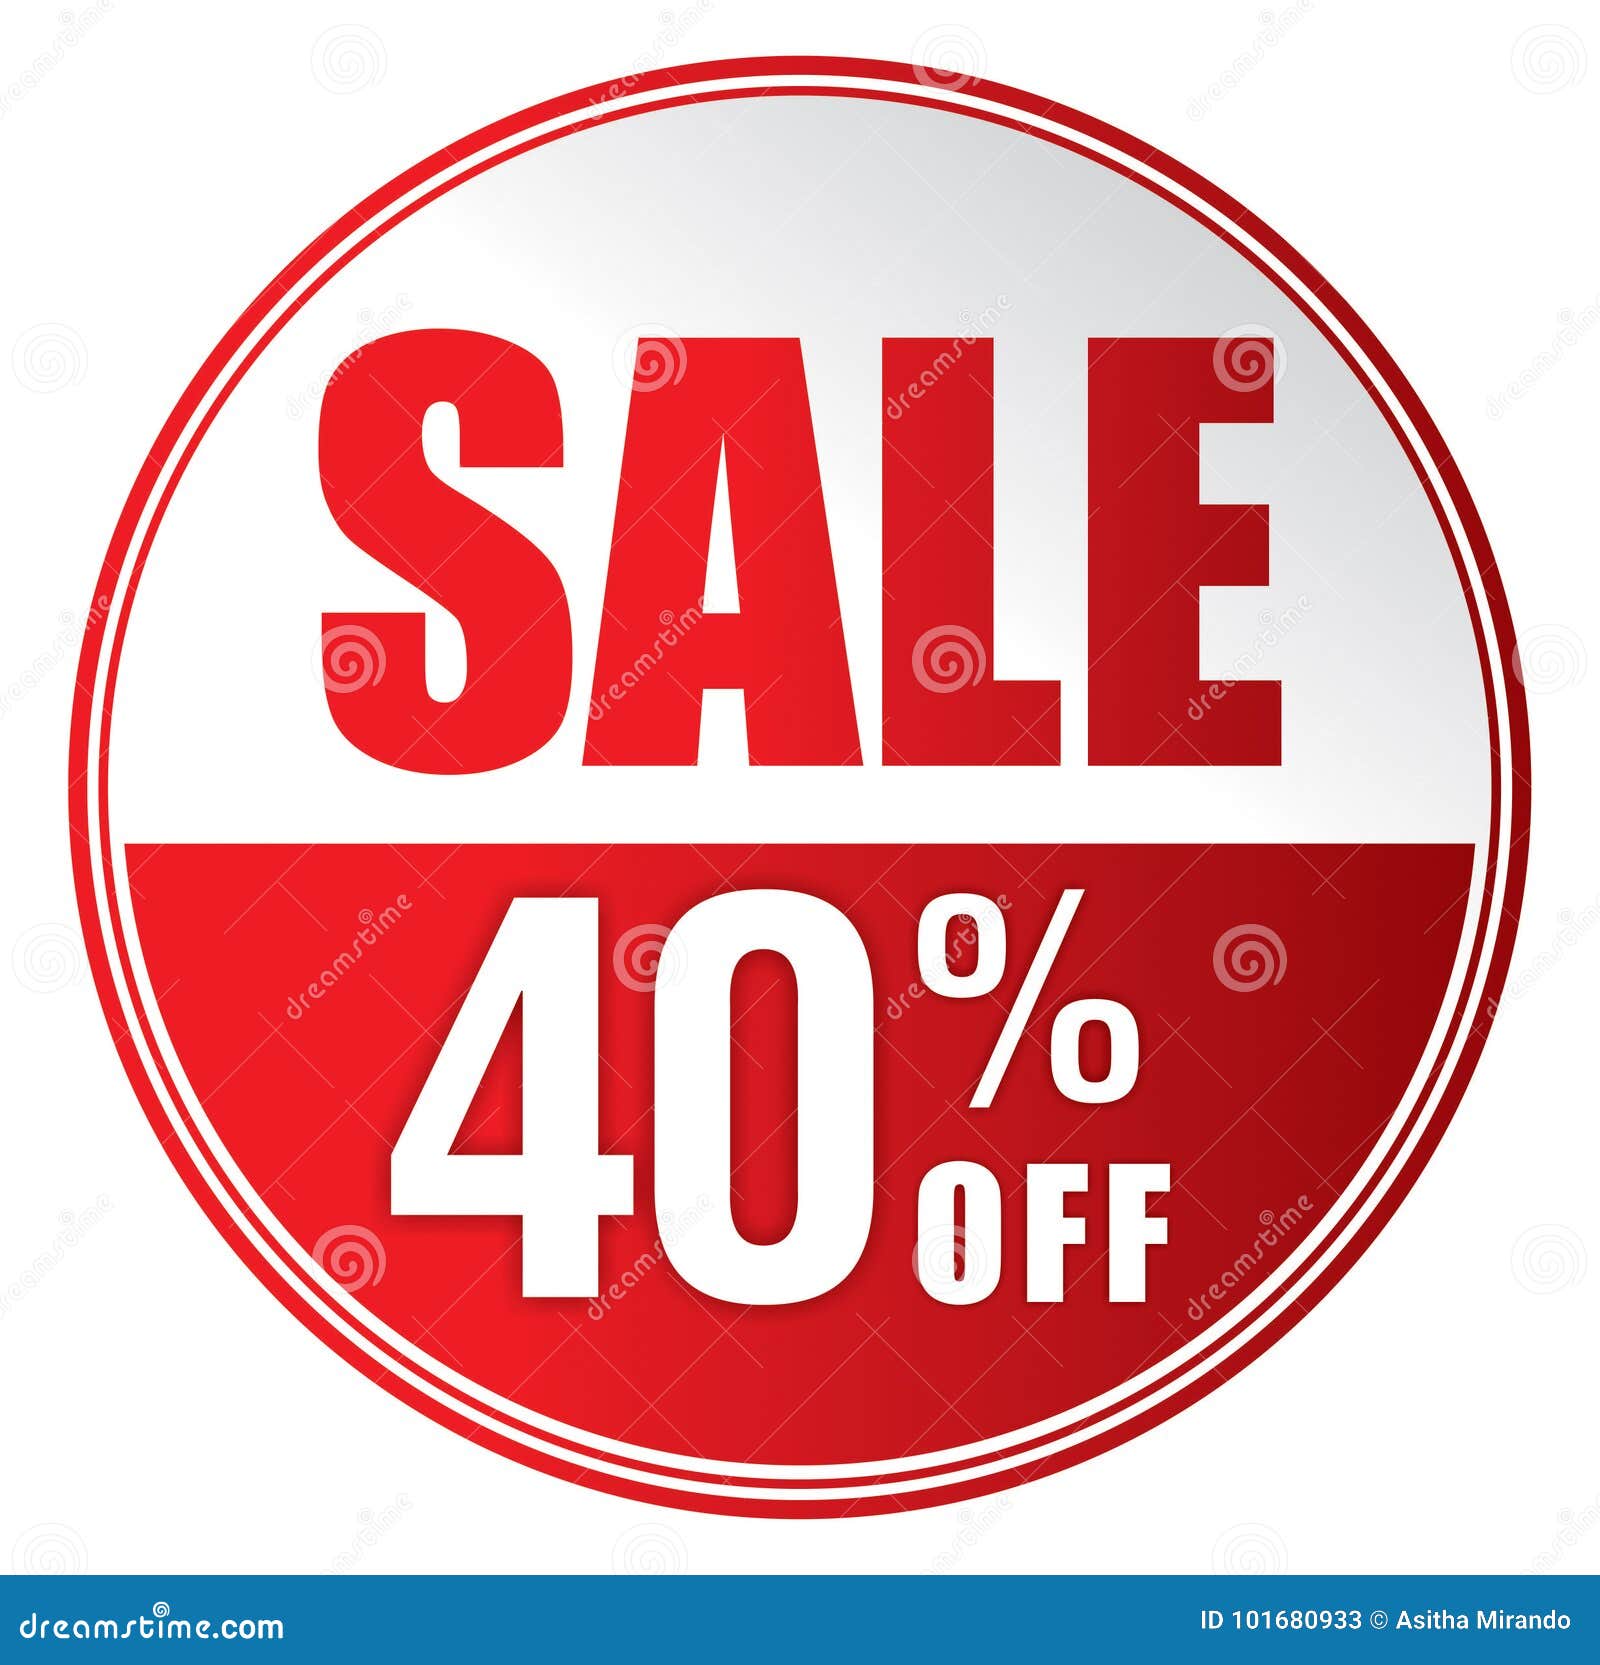 Sale 40 OFF stock vector. Illustration of percent, special - 101680933